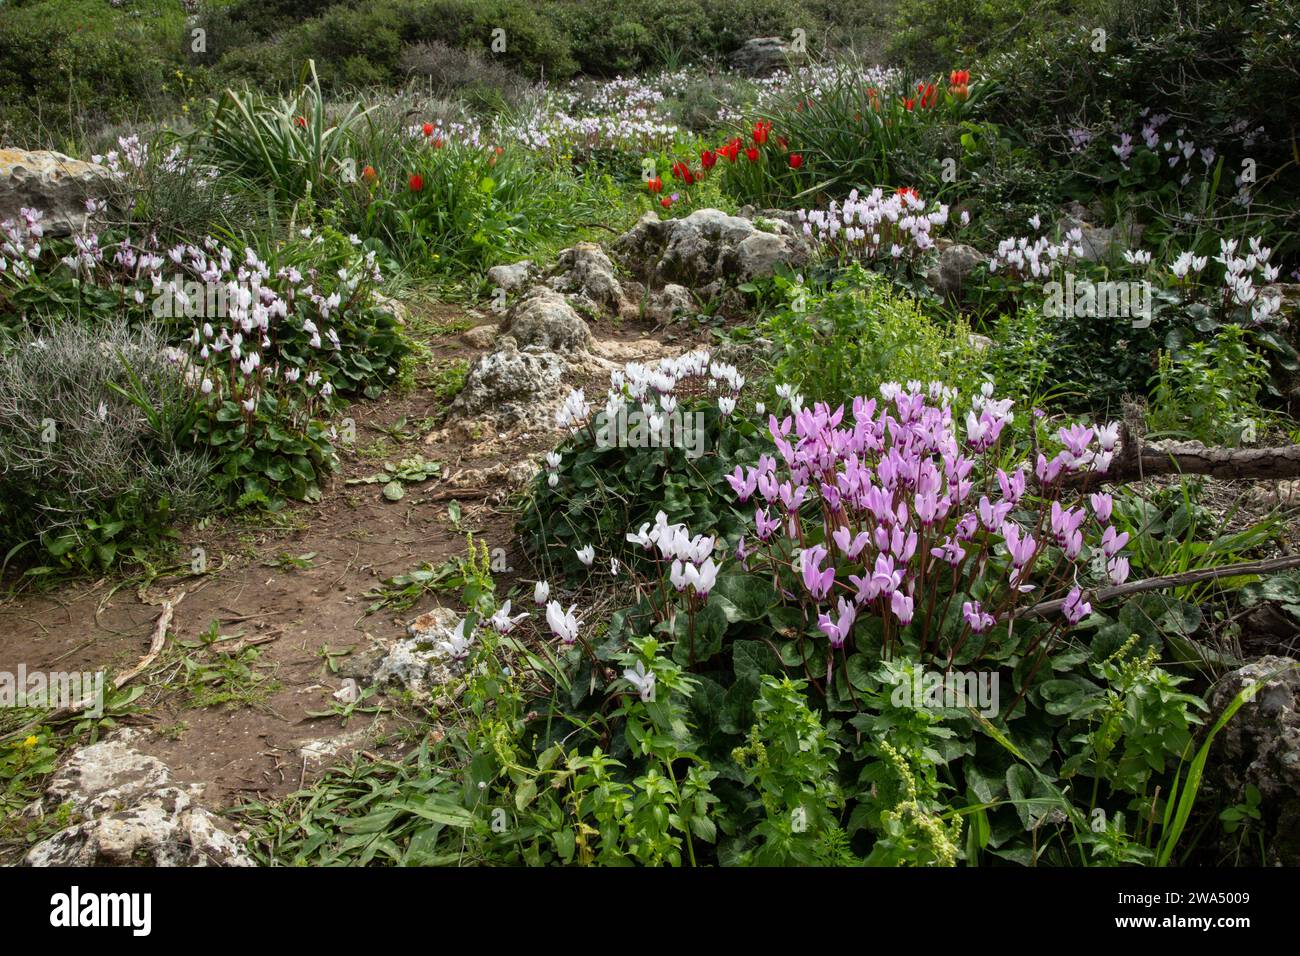 A cluster of Flowering Persian Violets (Cyclamen persicum). Photographed in the Mediterranean Coastal plains, Israel in February Stock Photo